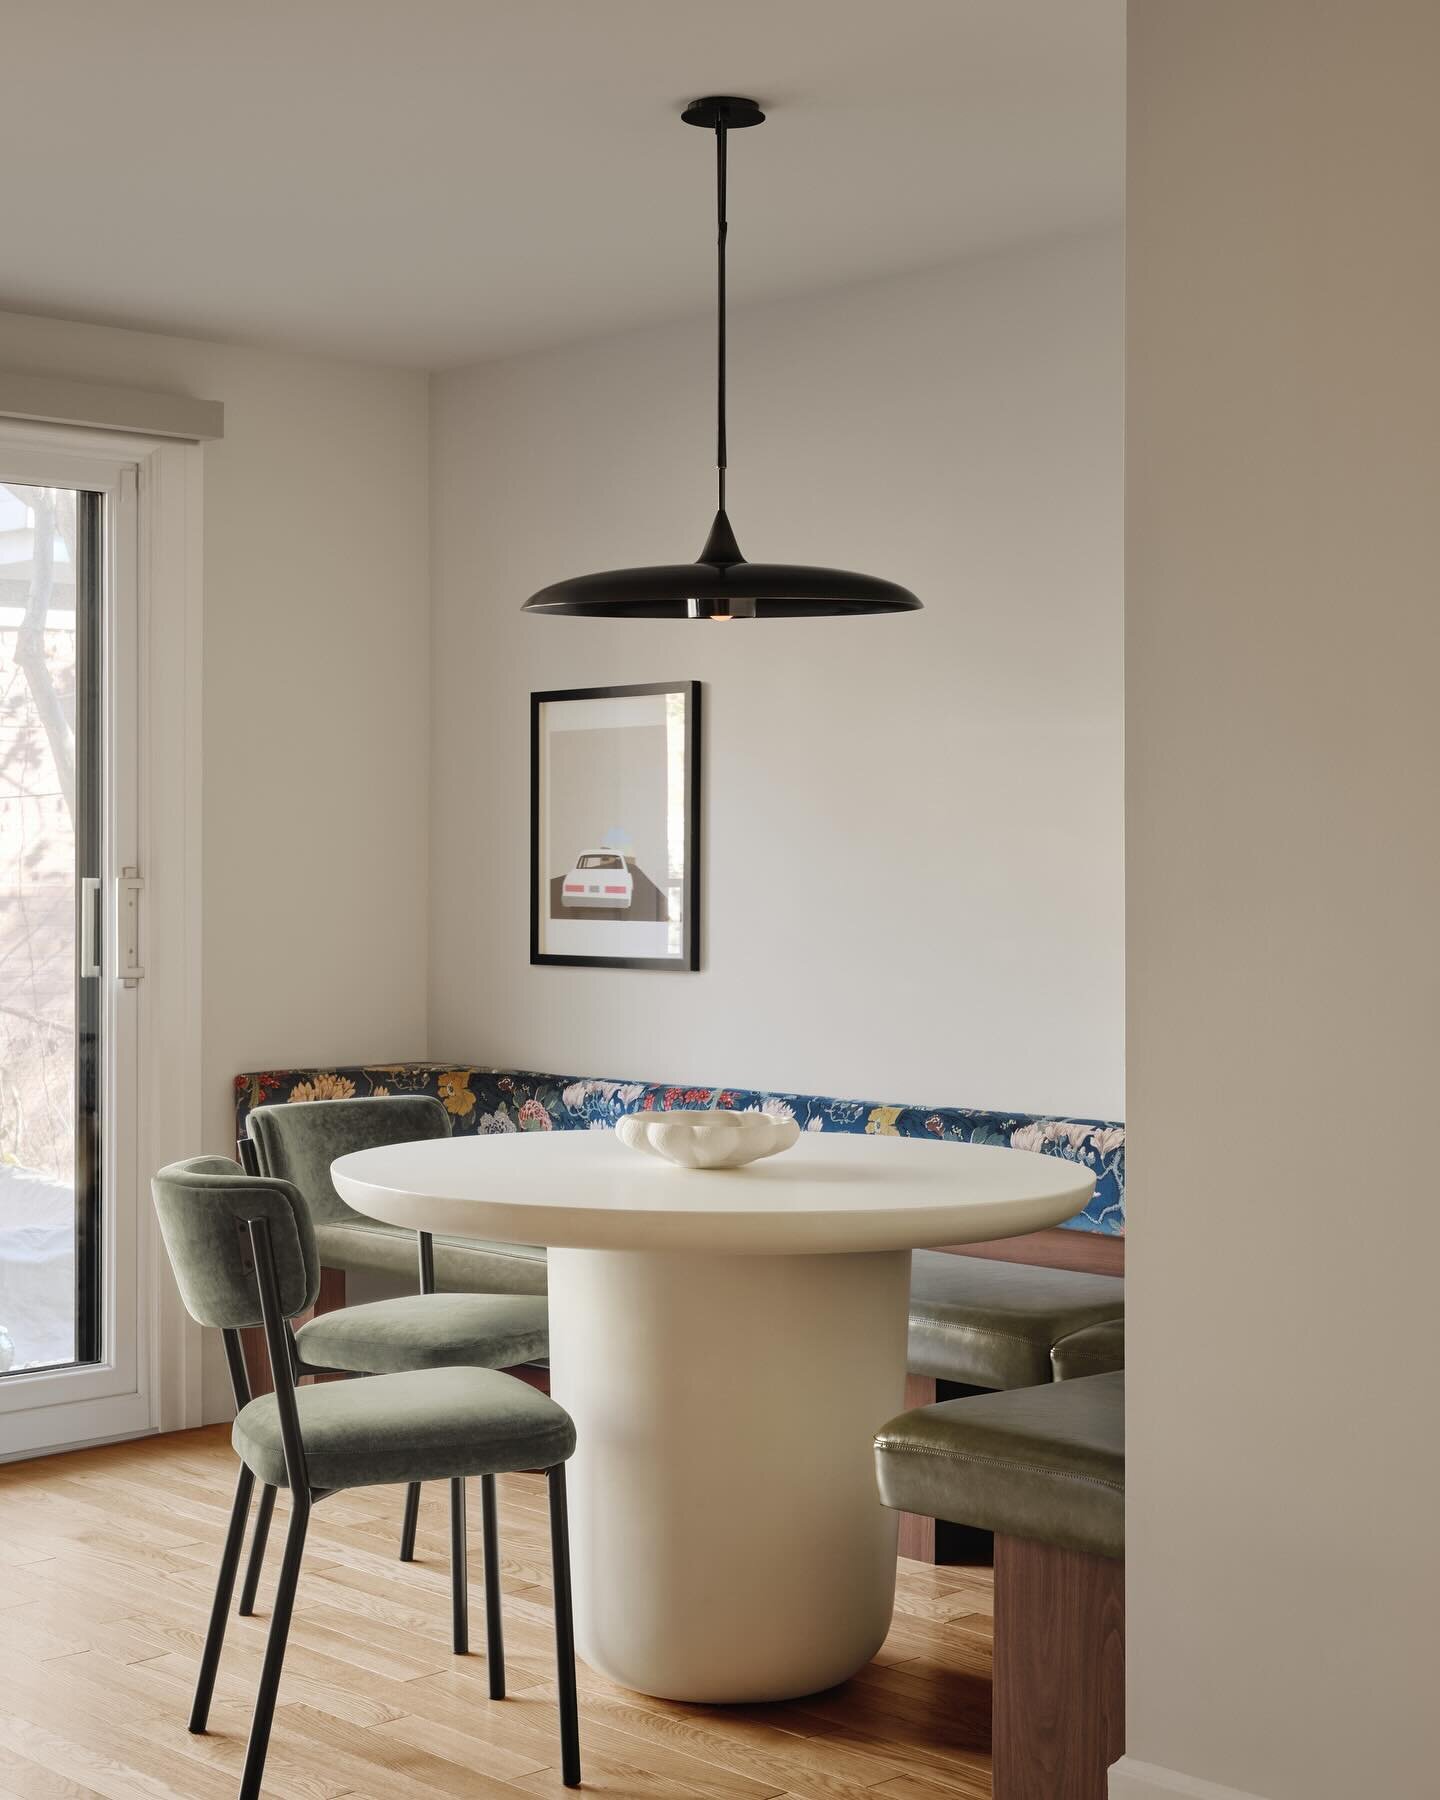 The core of our Northcliffe project was the coffee and cocktail lounge. What started as a tricky space just off the dining room became one of the most stimulating parts of the home for this young couple who loves to entertain. 

Here, we focused on c